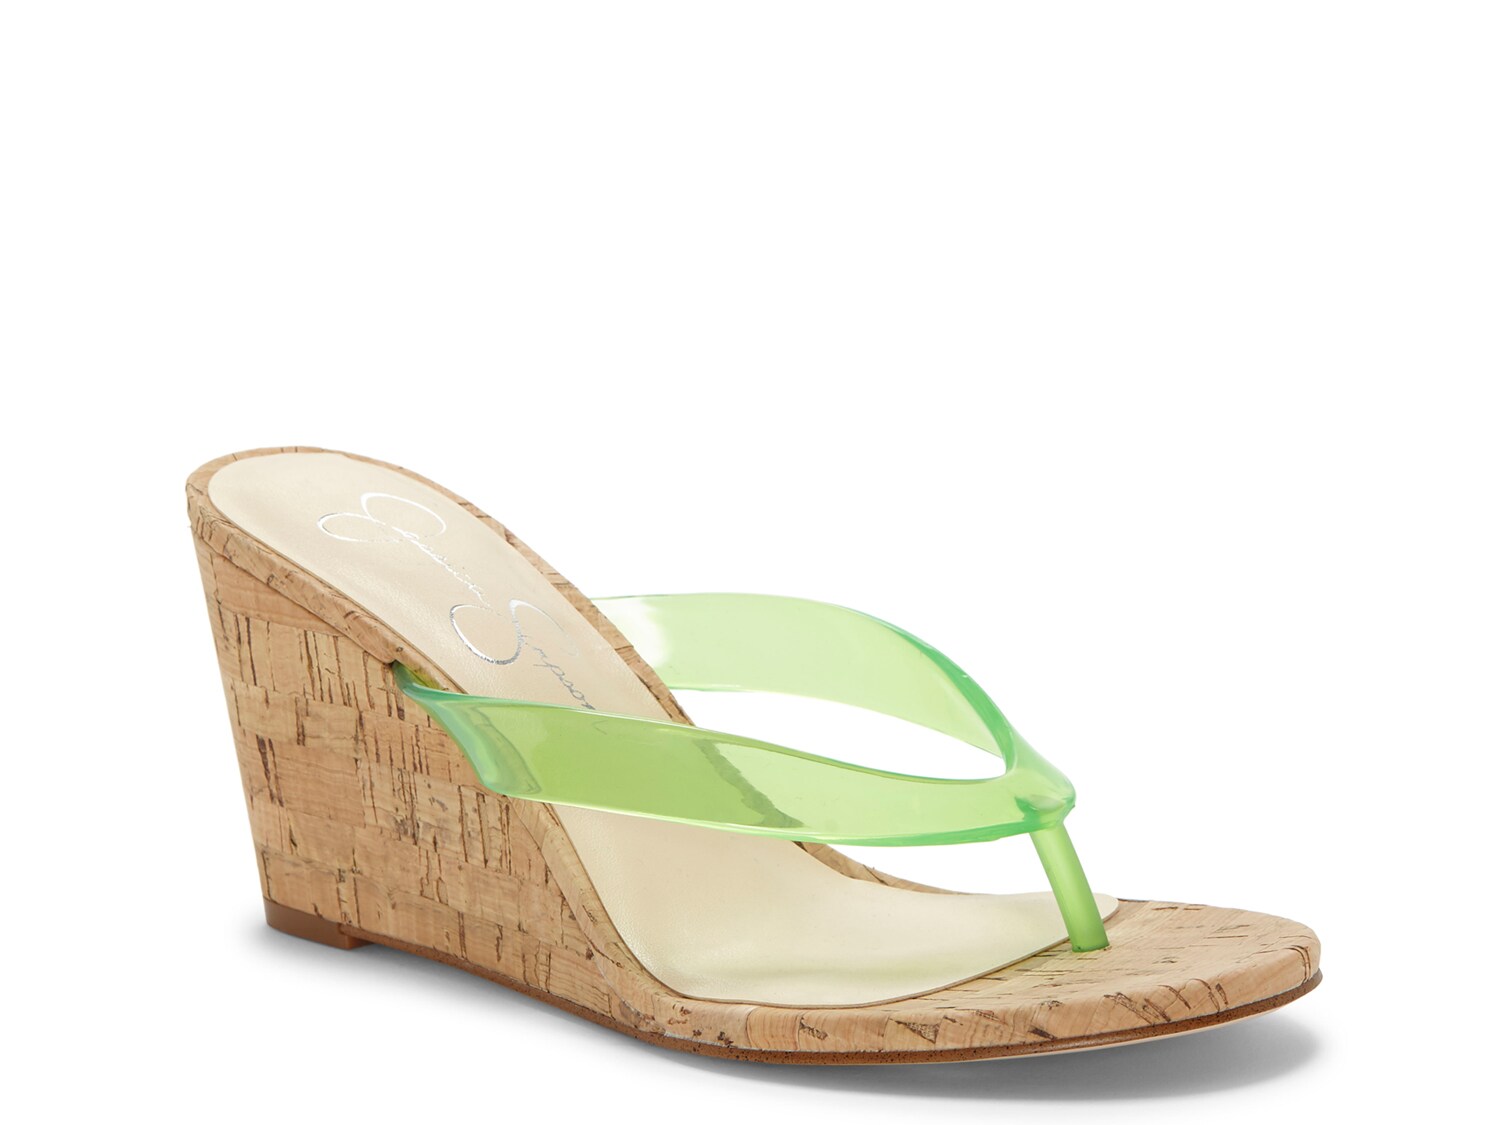 Jessica Simpson Coyrie 2 Wedge Sandal - Free Shipping | DSW